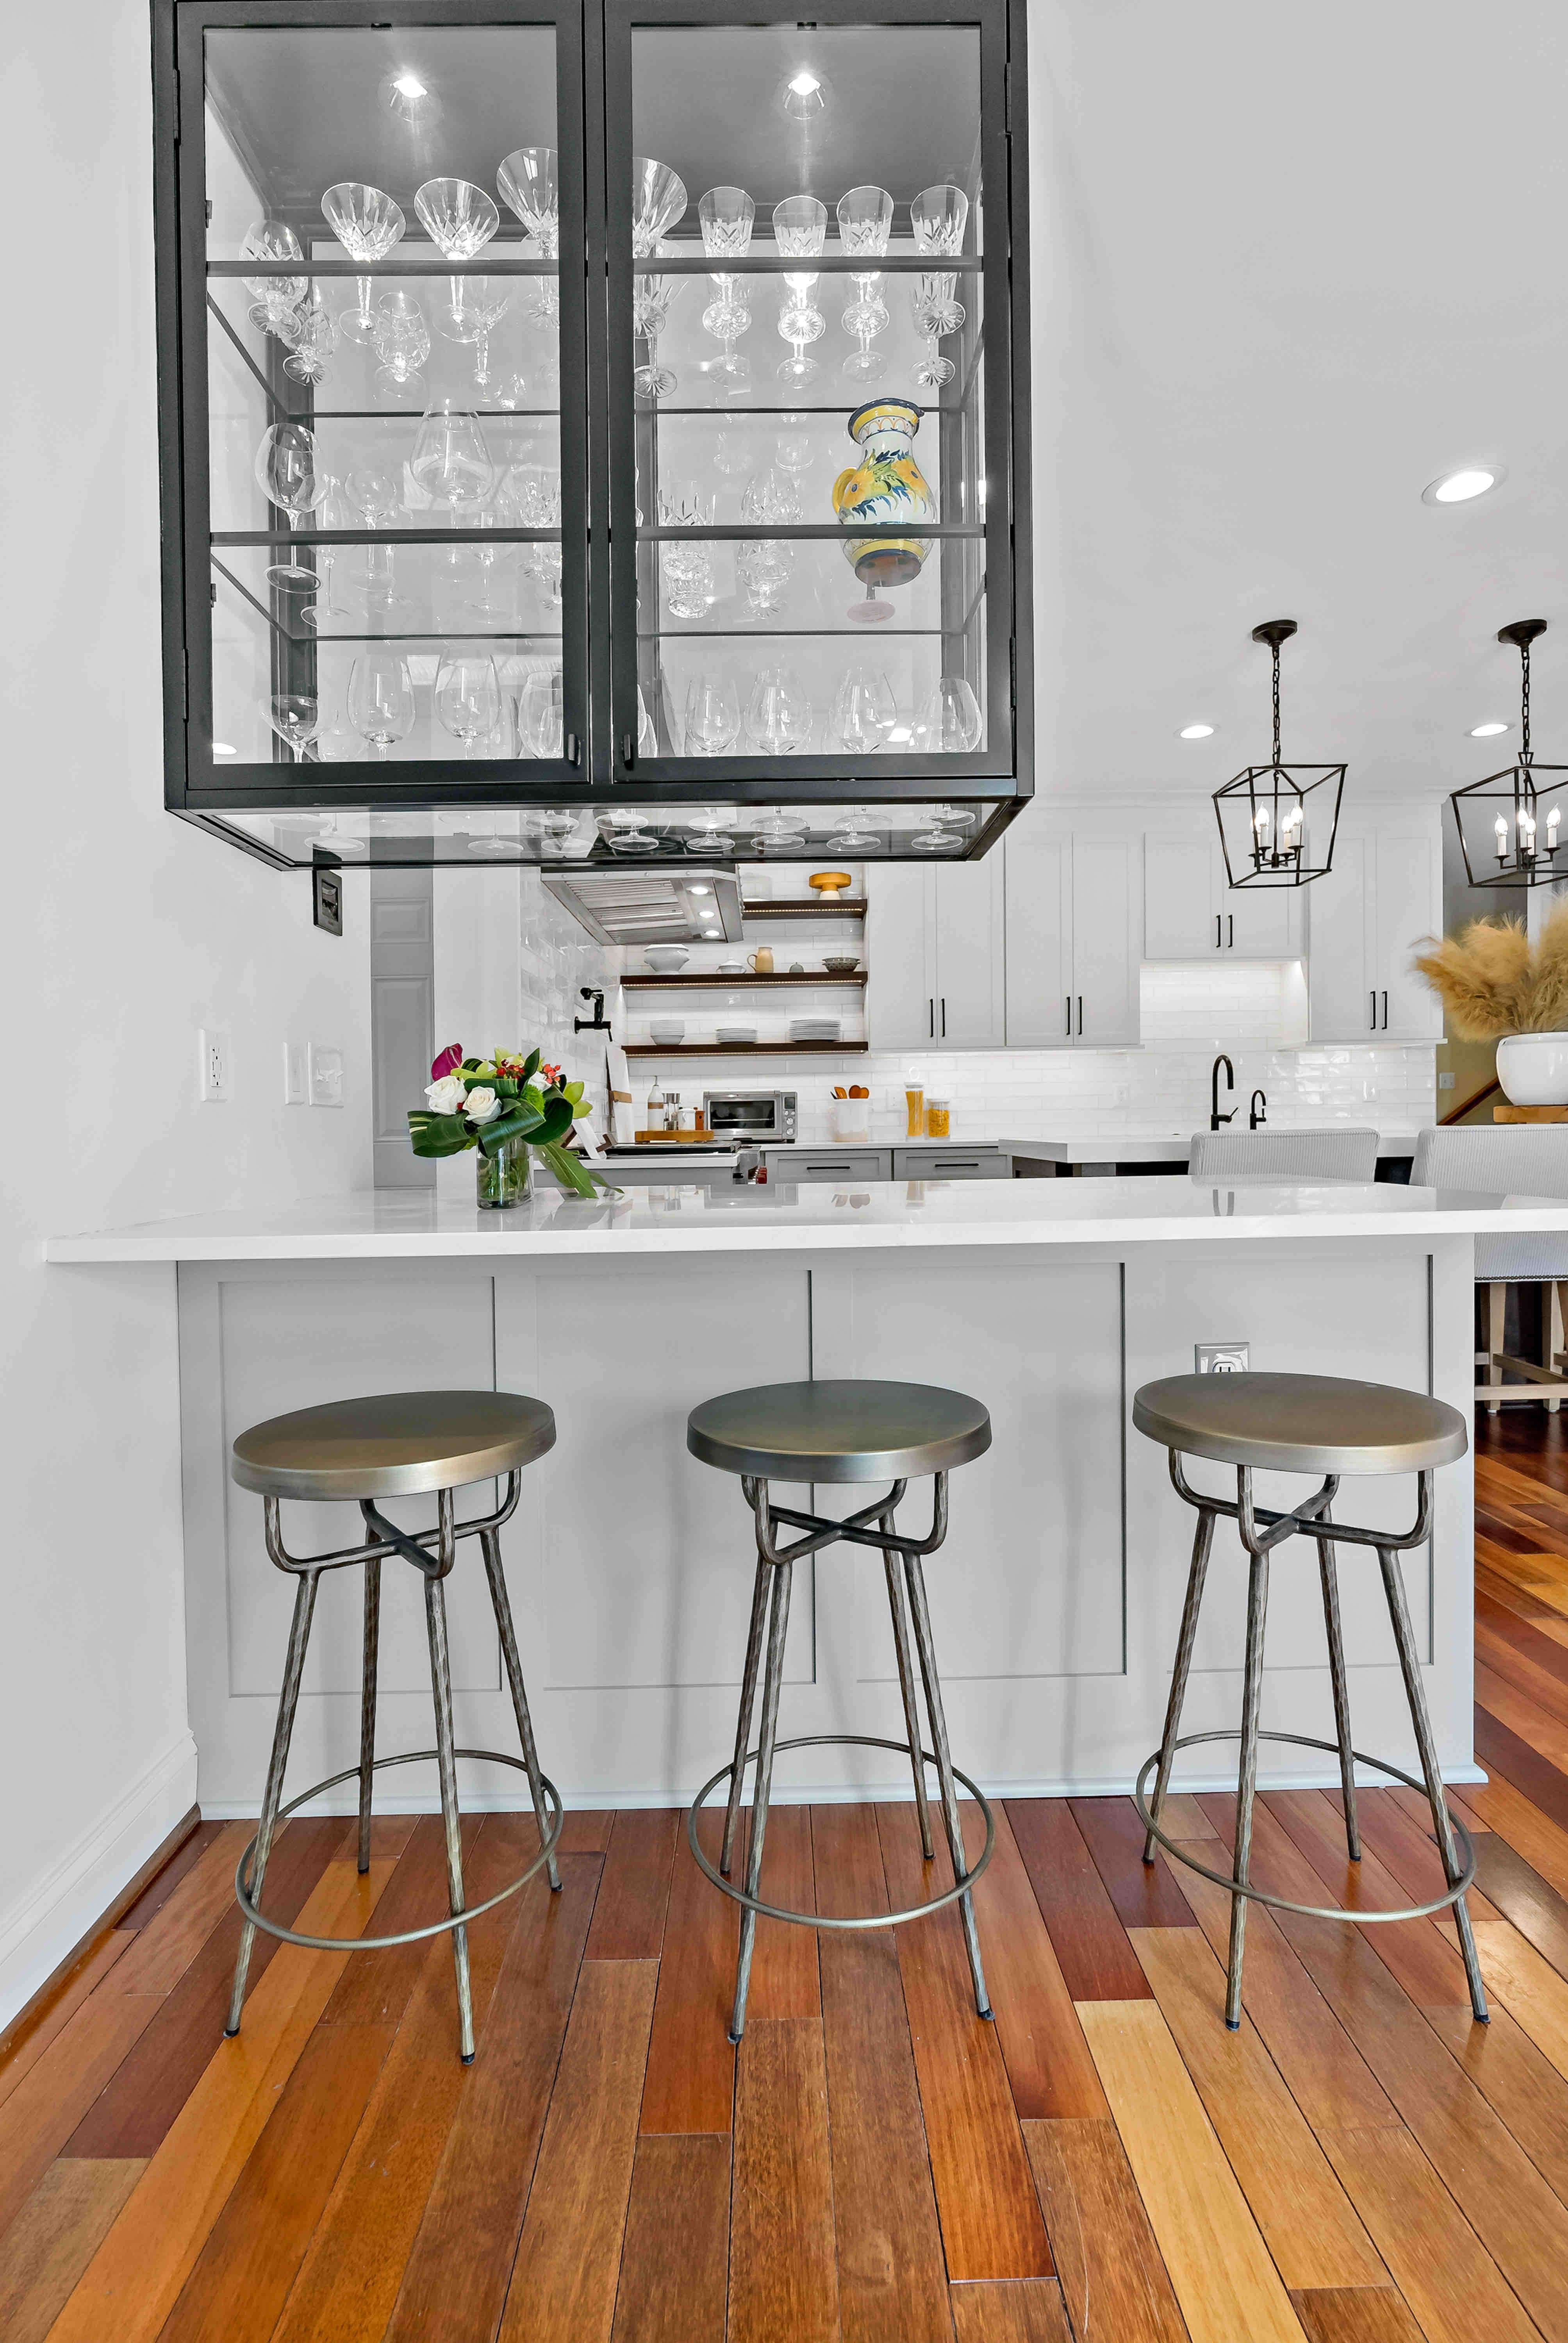 Bar stool seating at kitchen island with glass cabinets